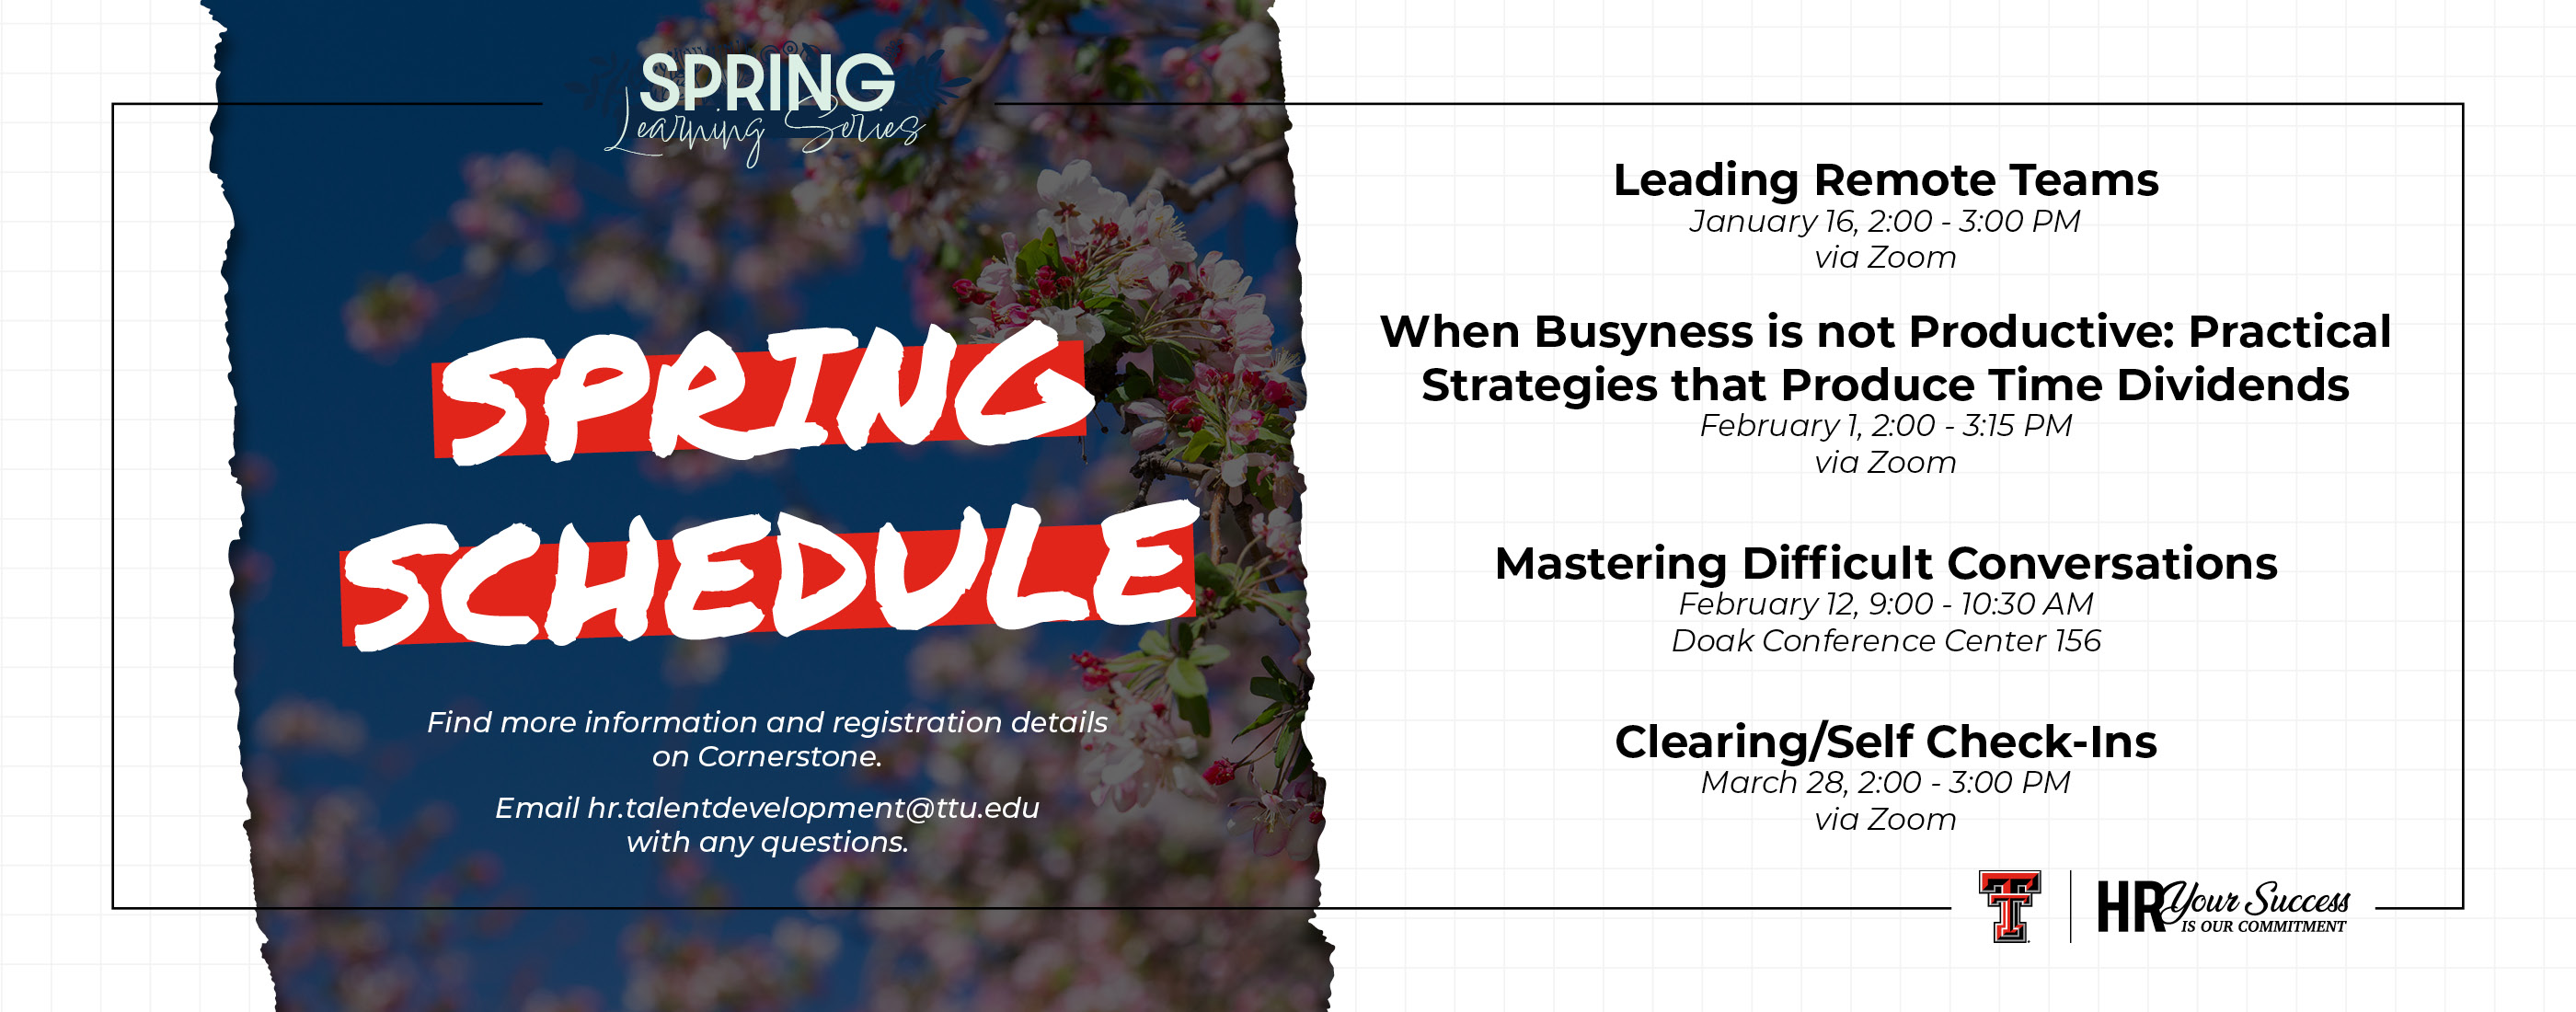 Spring Learning Series Schedule